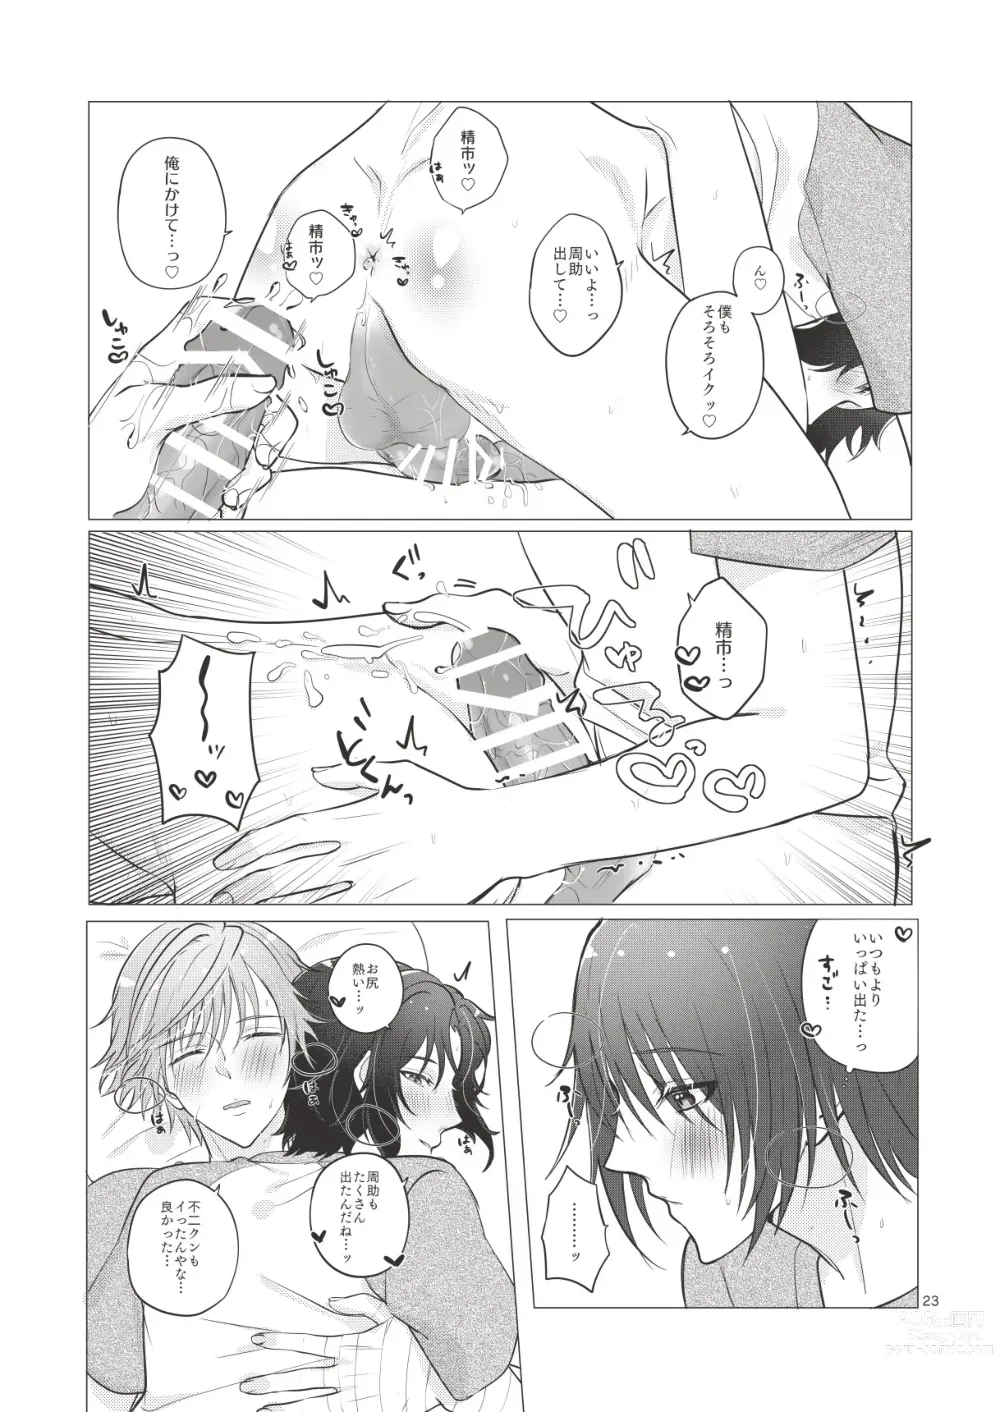 Page 22 of doujinshi Bonds of affection